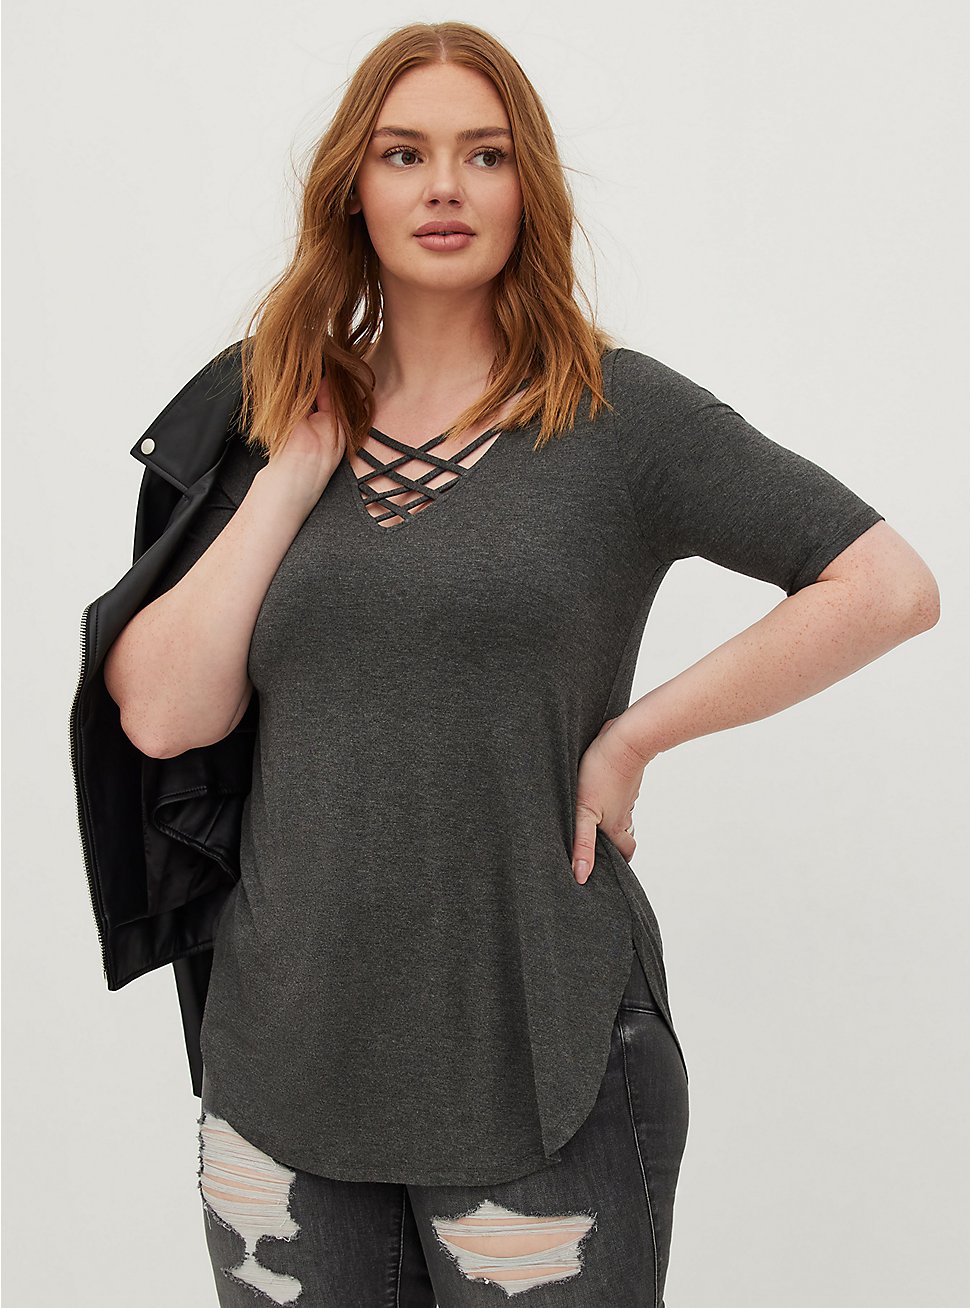 Favorite Tunic Super Soft V-Neck Strappy Tunic Tee, CHARCOAL HEATHER GREY, hi-res